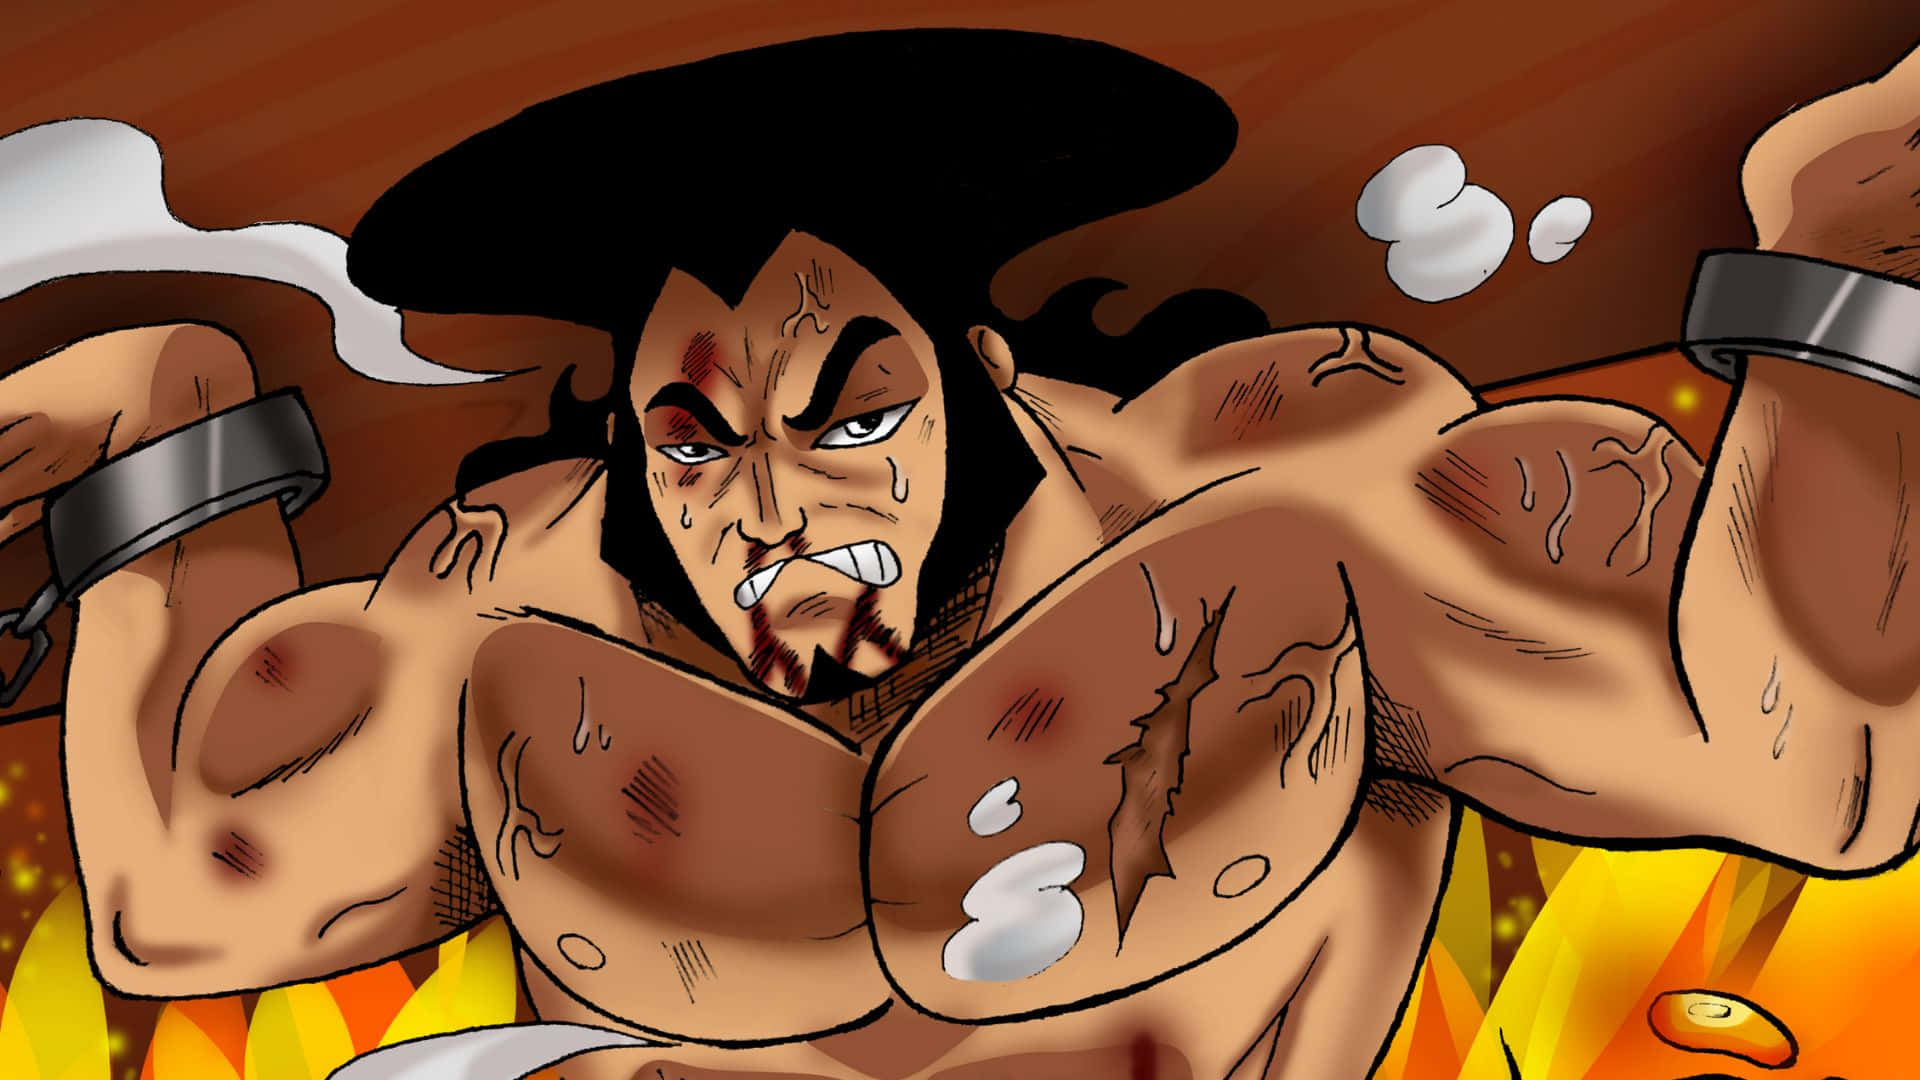 "Kozuki Oden as he appears in the popular anime TV series One Piece" Wallpaper